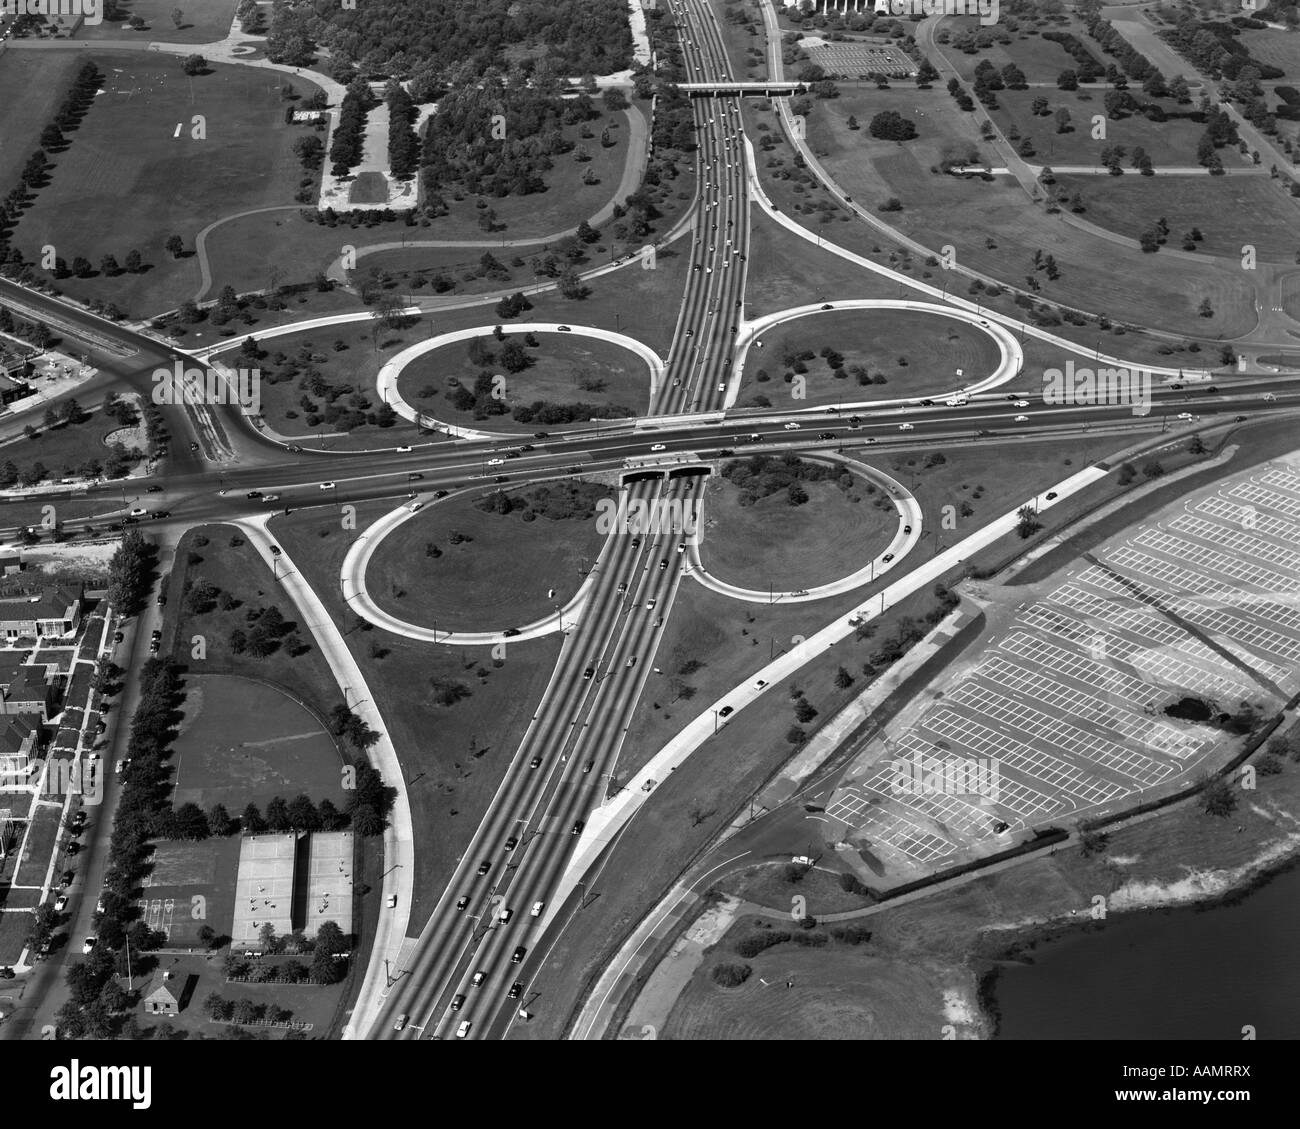 1950s 1960s AERIAL CLOVERLEAF HIGHWAY INTERSECTION GRAND CENTRAL PARKWAY FLUSHING MEADOW PARK QUEENS NEW YORK Stock Photo